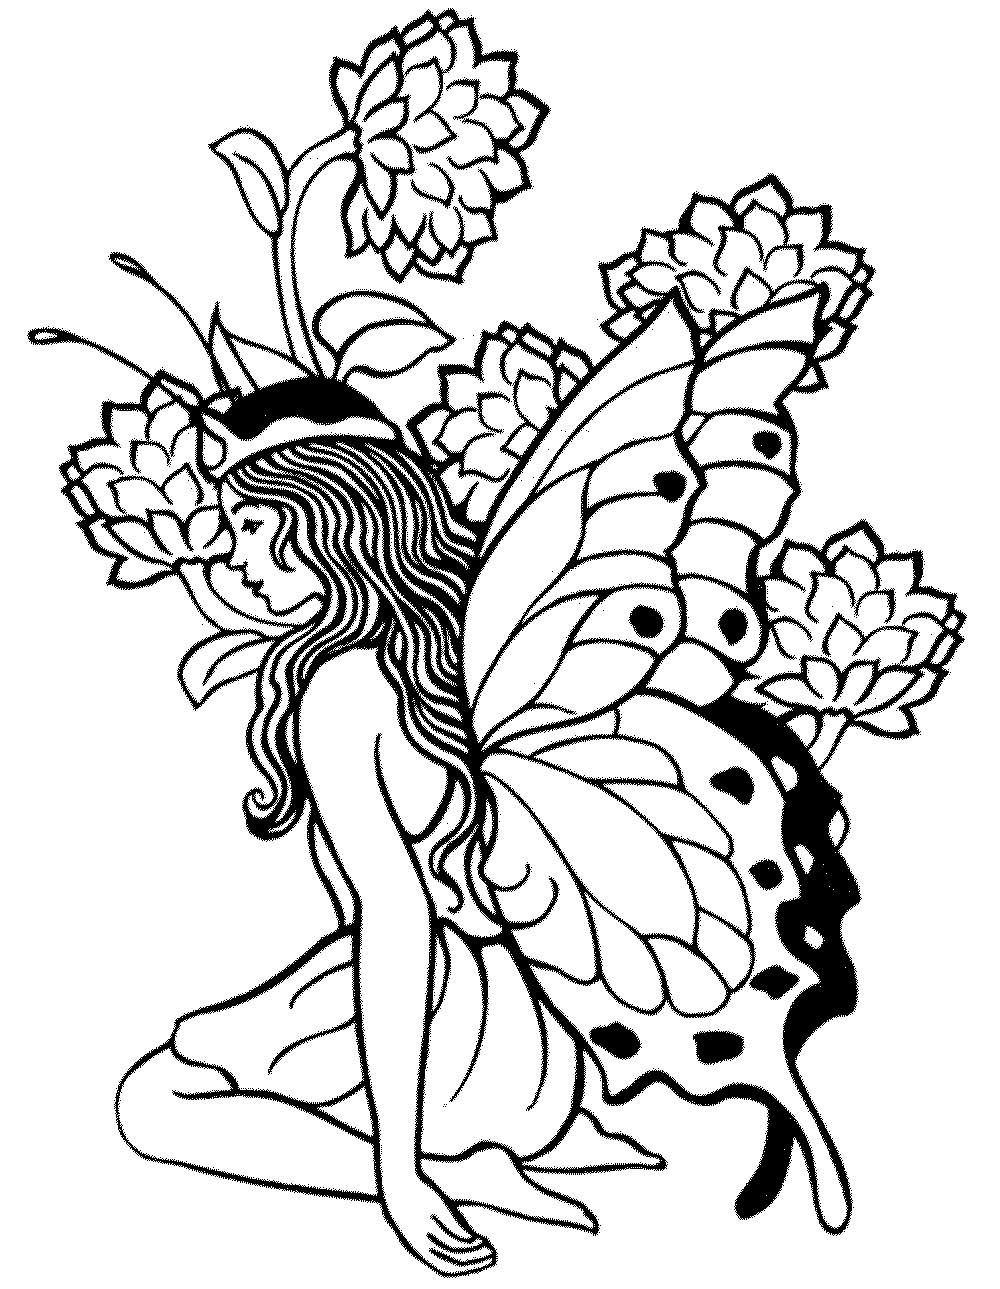 Printable Adult Coloring Pages Fairy - Coloring Home - Free Printable Coloring Pages Fairies Adults